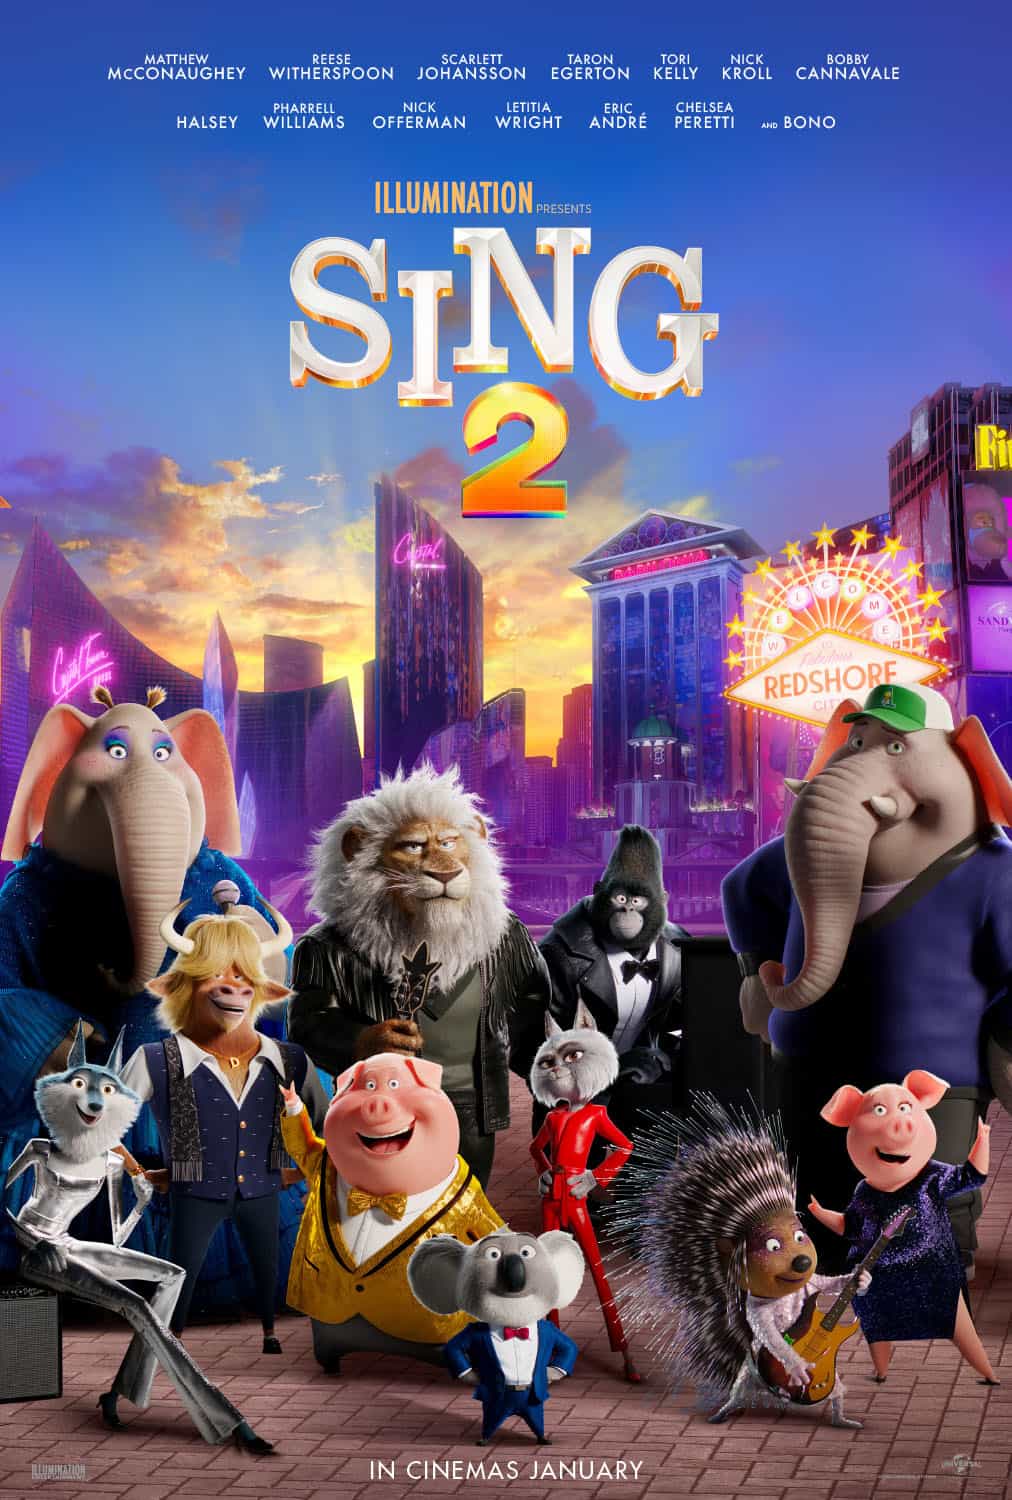 Sing 2 is given a U age rating in the UK for very mild bad language, threat, violence, rude humour